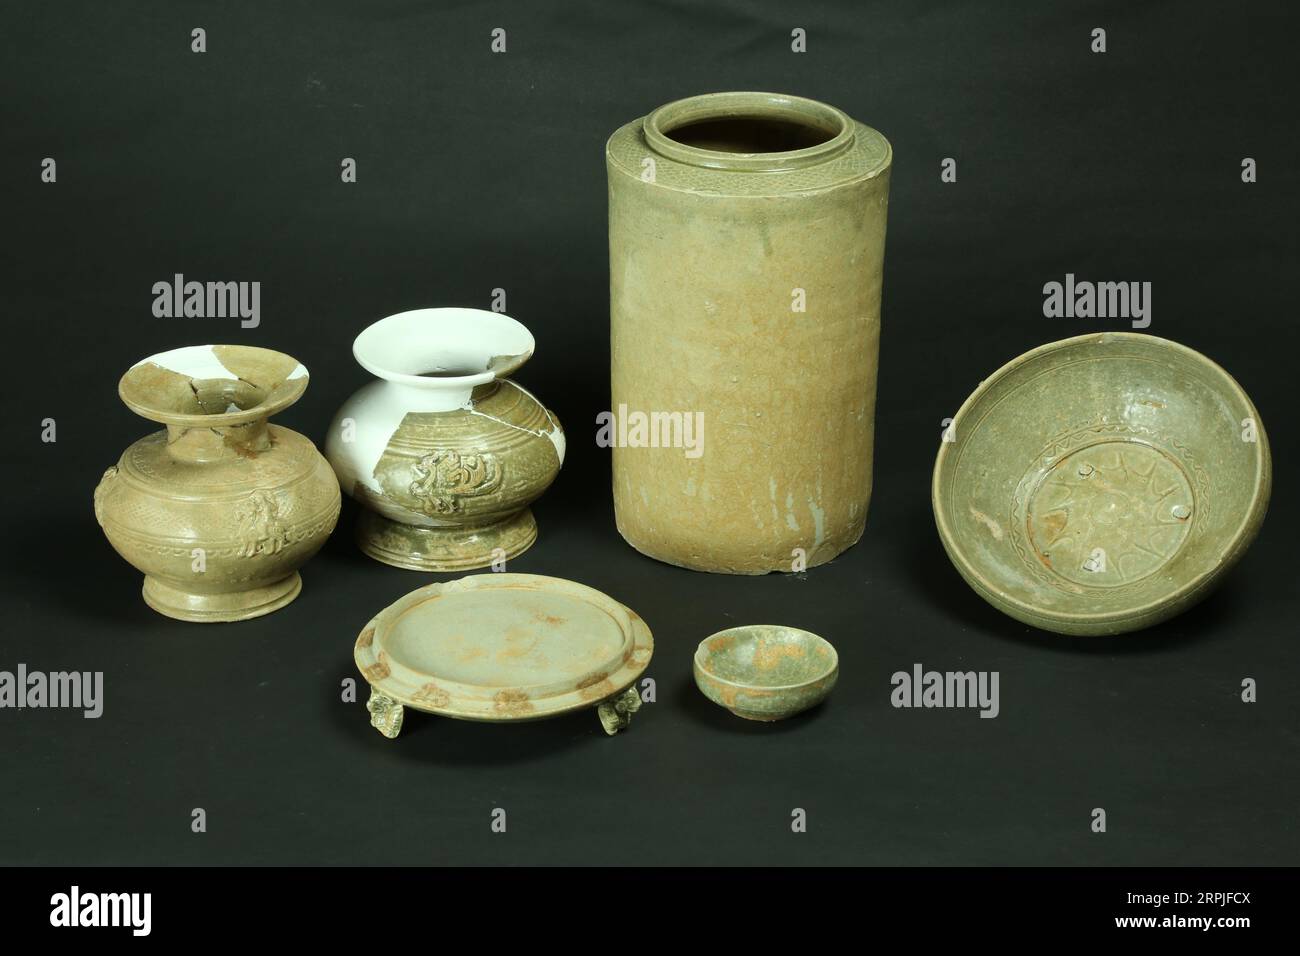 191208 -- NANCHANG, Dec. 8, 2019 -- Photo taken on Sept. 24, 2019 shows relics unearthed from the ancient tombs excavated in Ganjiang New District, Nanchang, east China s Jiangxi Province. Archaeologists have excavated 73 ancient tombs dating back 1,400 years ago in east China s Jiangxi Province, the local institute of cultural relics and archeology said Saturday. It is believed that the majority of the discovered tombs were built in the Six Dynasties 222-589. The 8,000-square-meter site was discovered in June 2013. Excavation started in August 2018. CHINA-JIANGXI-ANCIENT TOMB CLUSTERS-DISCOVE Stock Photo